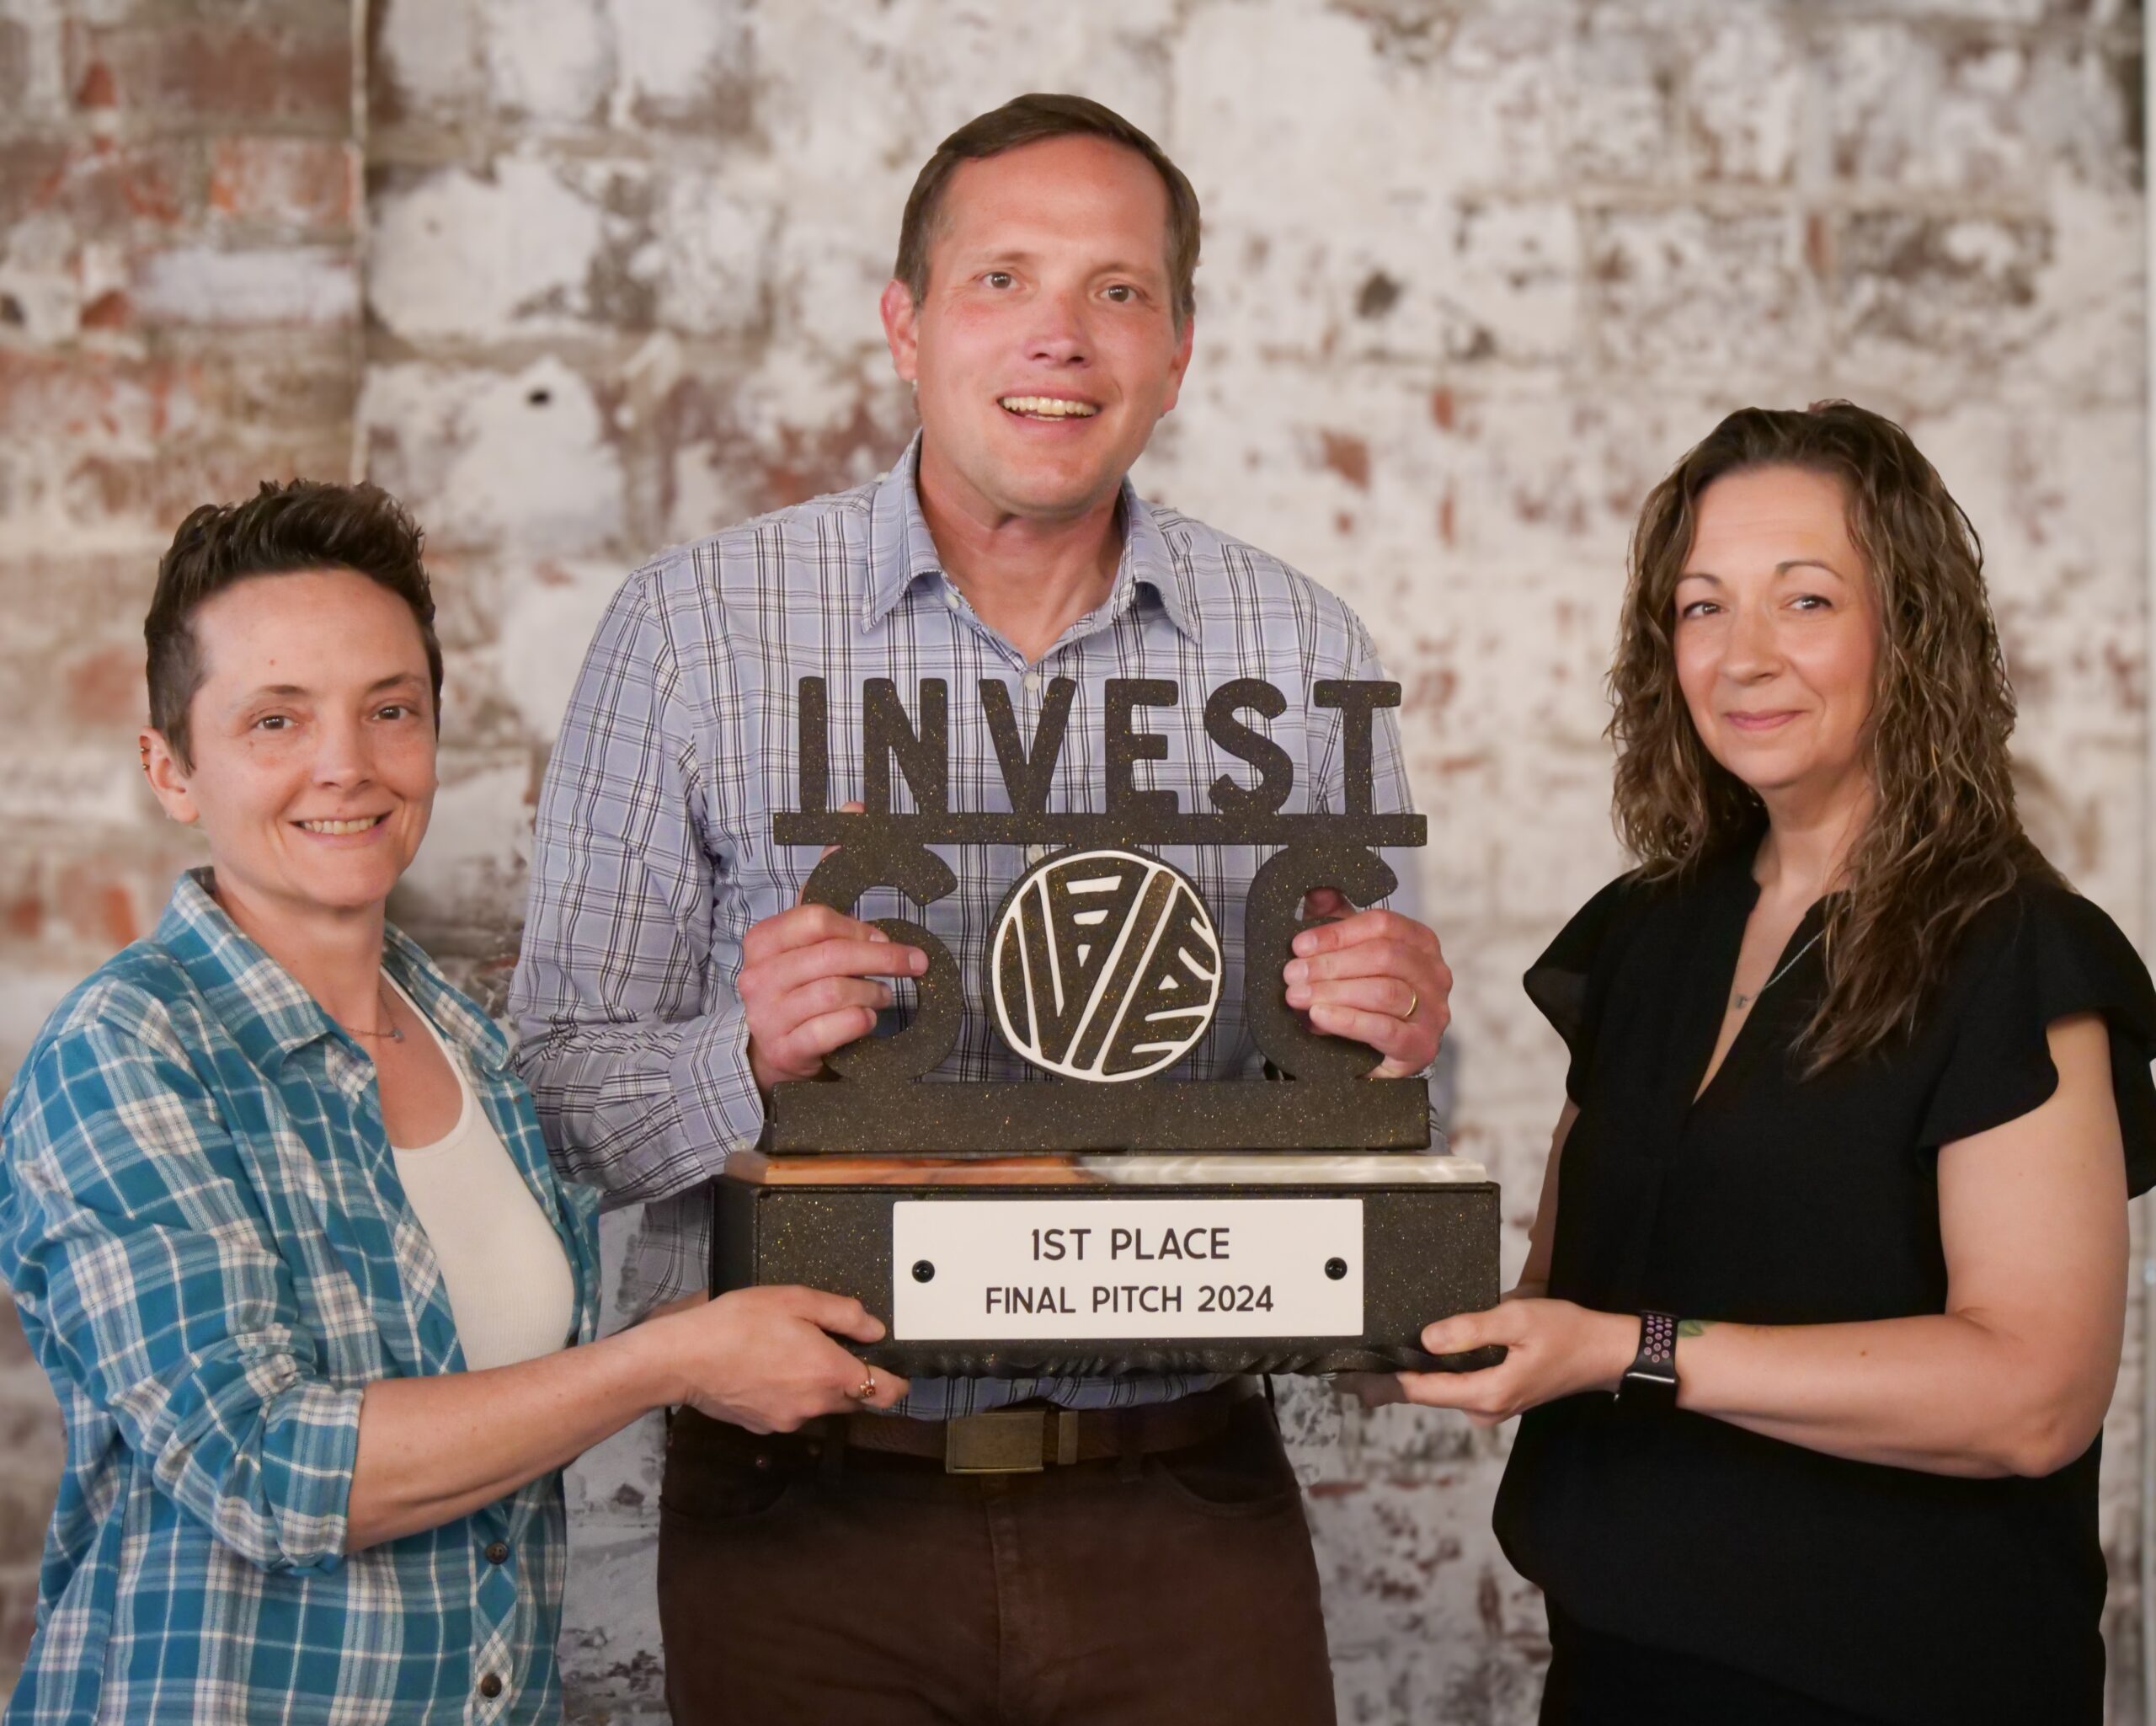 Who Won the Invest 606 2024 Final Pitch?